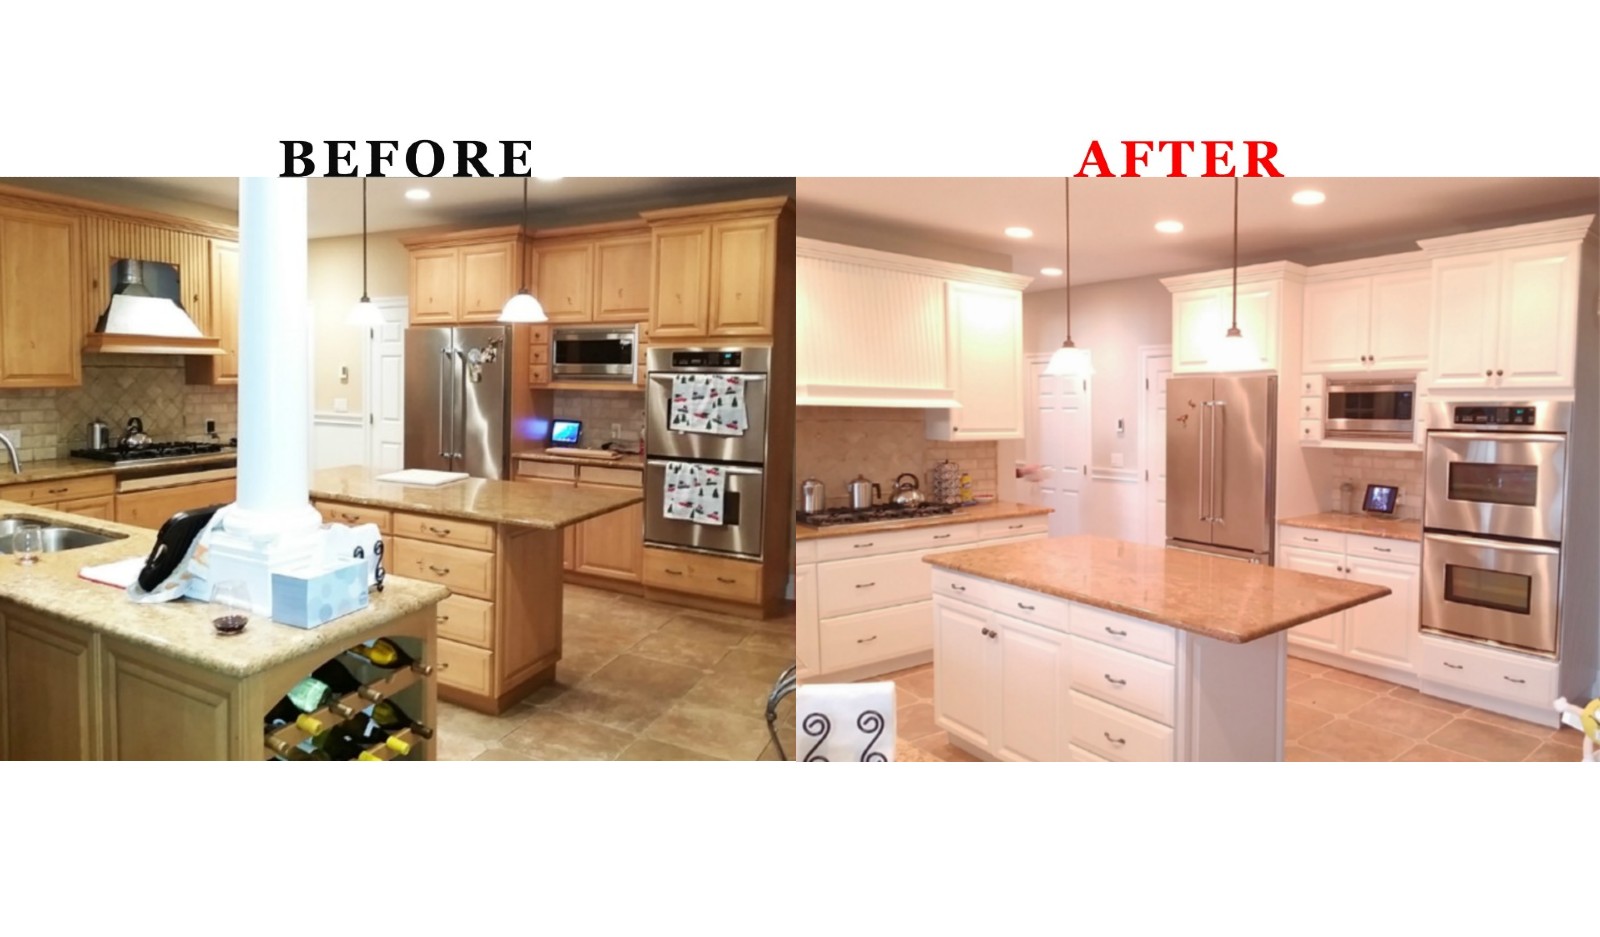 Painting Oak Kitchen Cabinets Before And After | Homeminimalisite.com